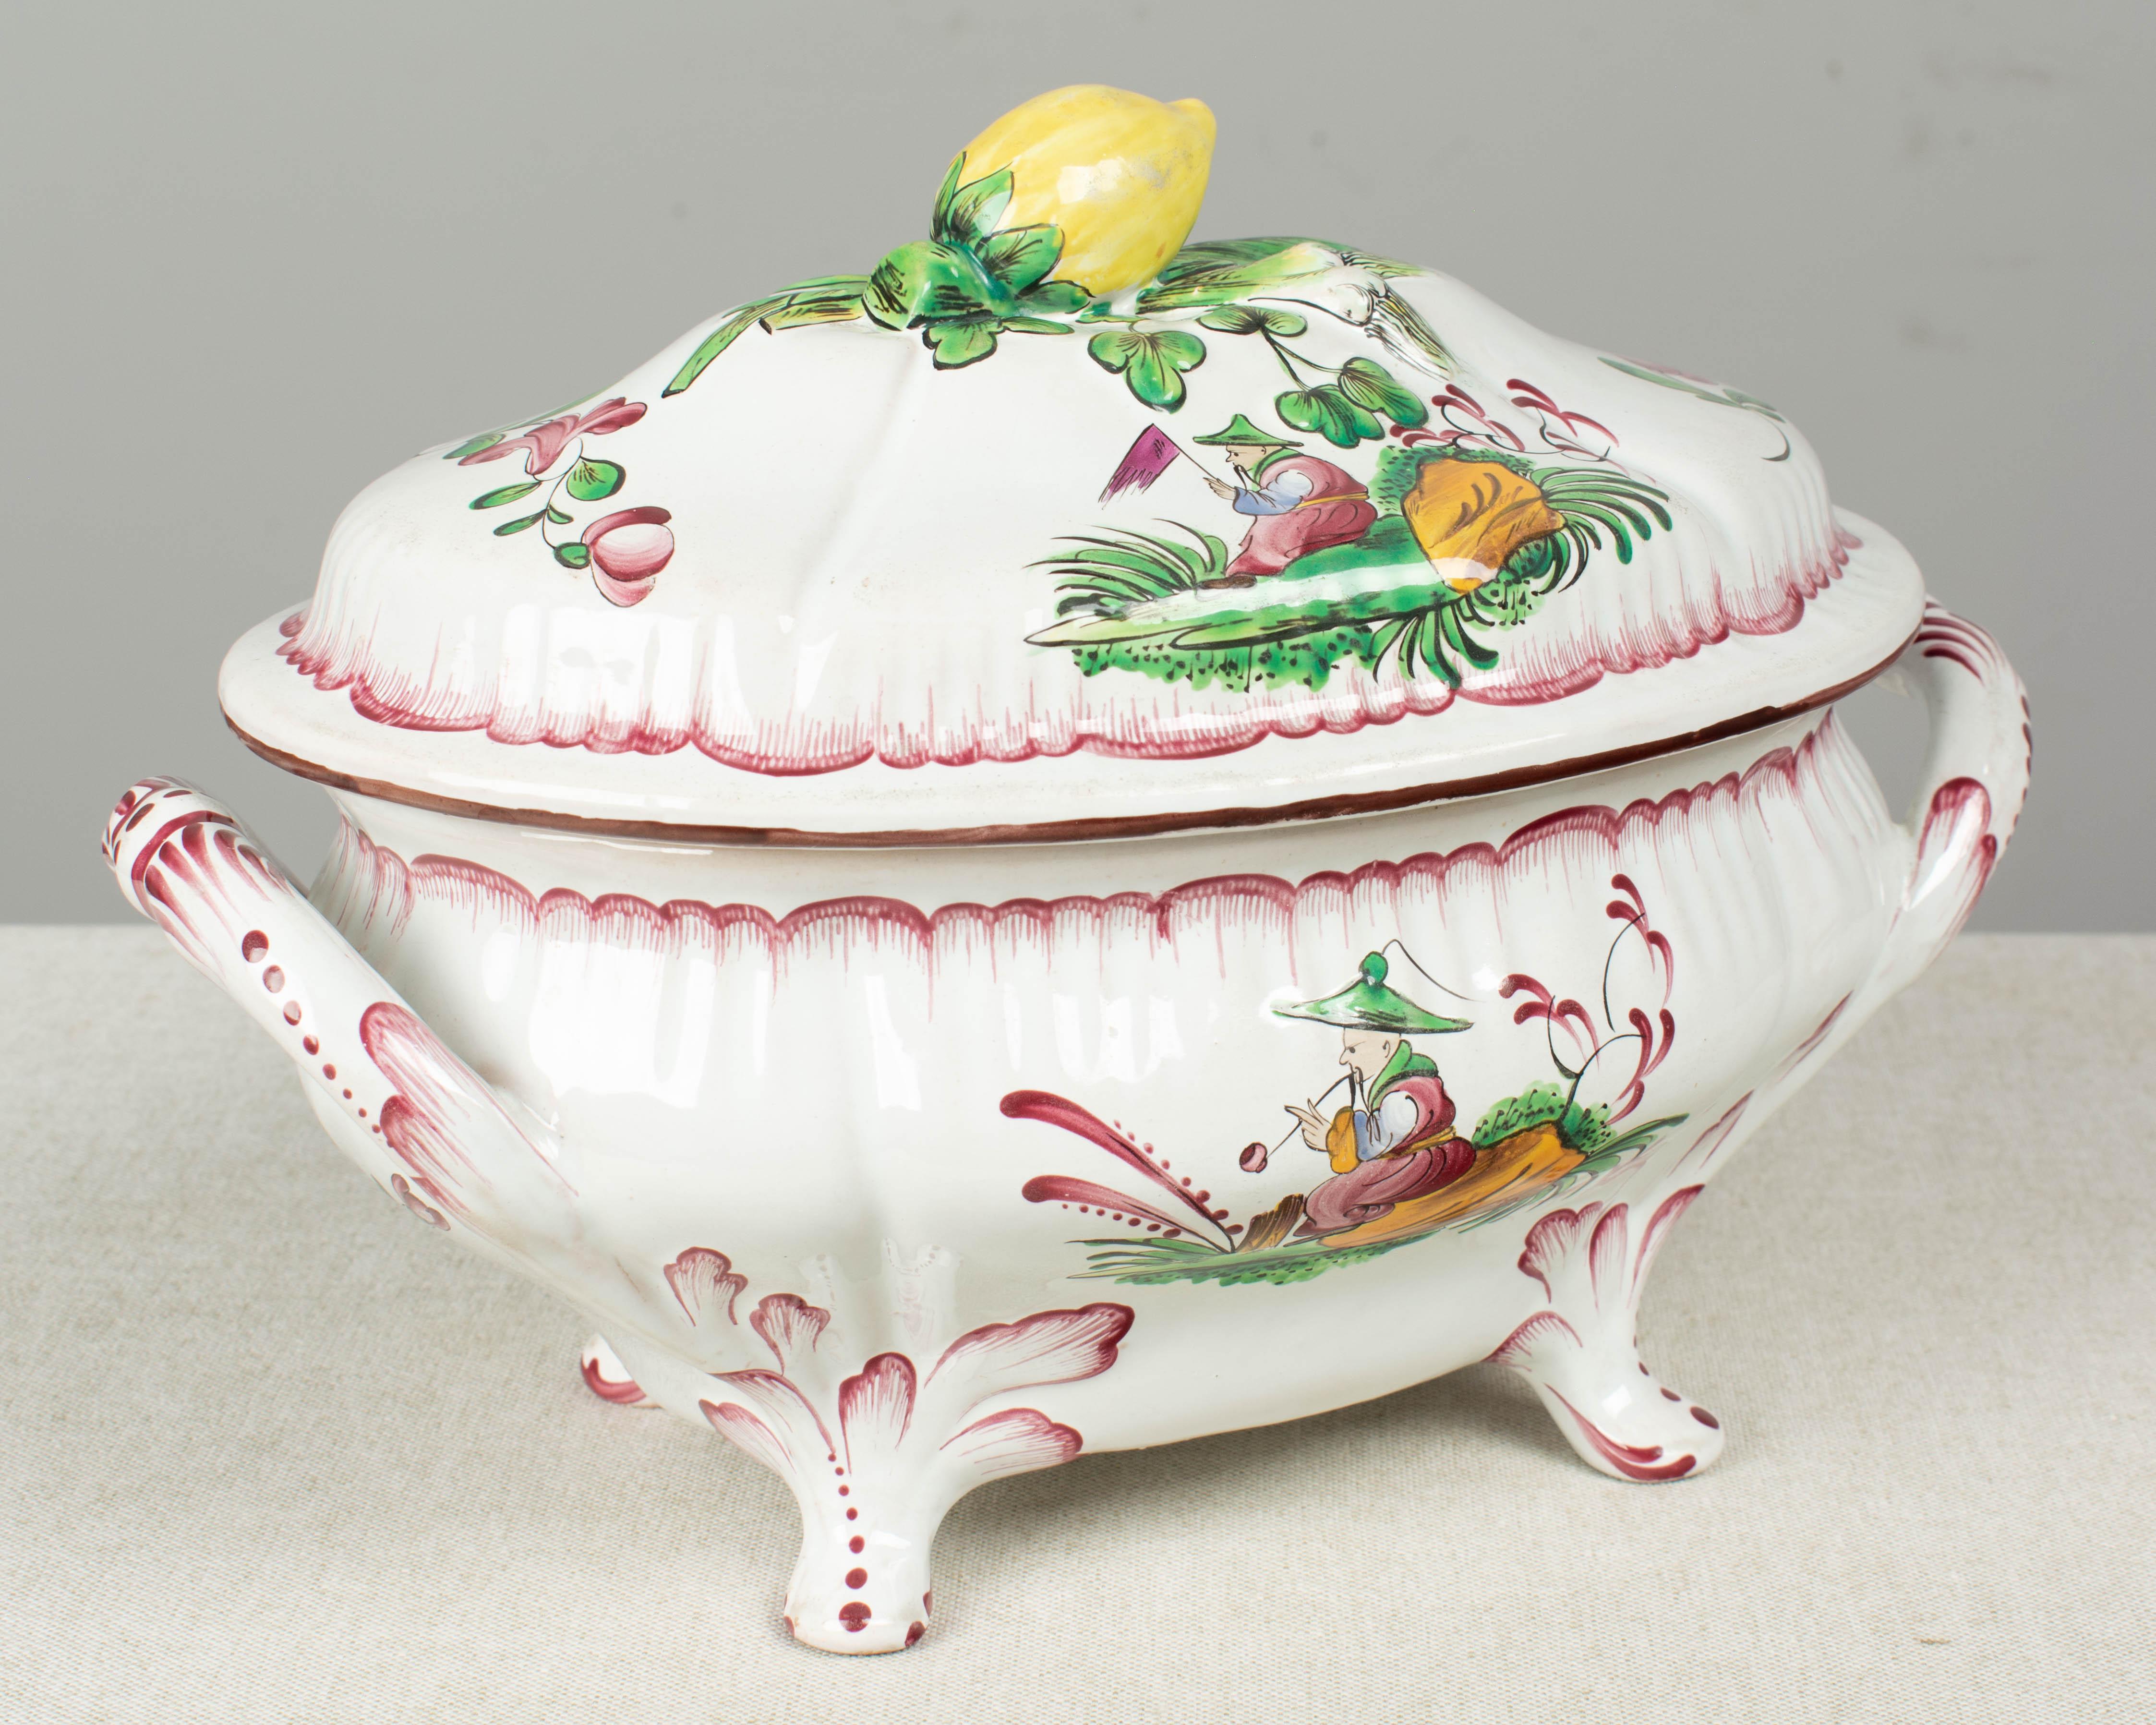 French Hand-Painted Faience Soup Tureen  In Good Condition For Sale In Winter Park, FL